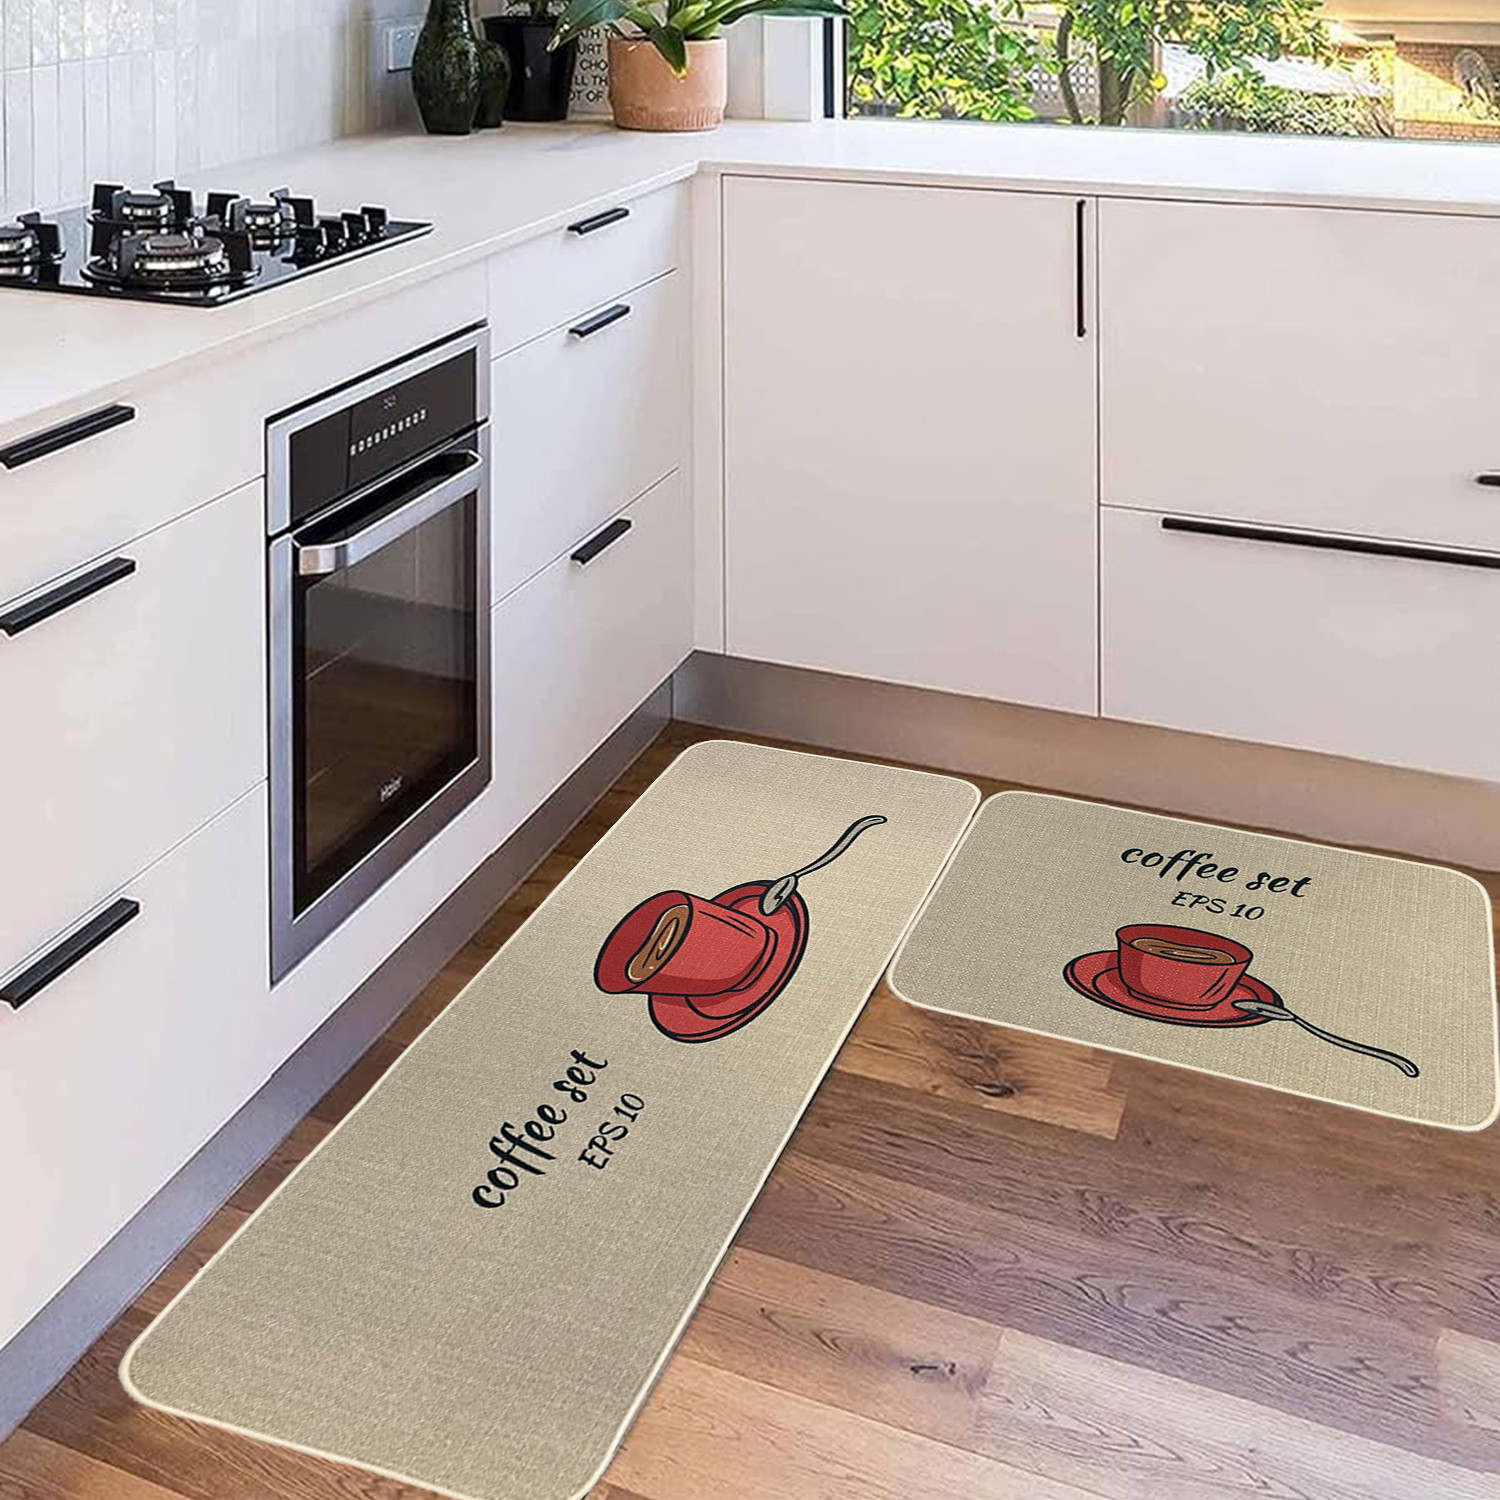 Kitchen+Rugs+Set%2C+2+Pieces+Kitchenware+Style+Non+Slip+Kitchen+Mat%2C+Easy+to+Clean+Comfort+Standing+Mats+for+Kitchen%2C+Home%2C+Office%2C+Laundry